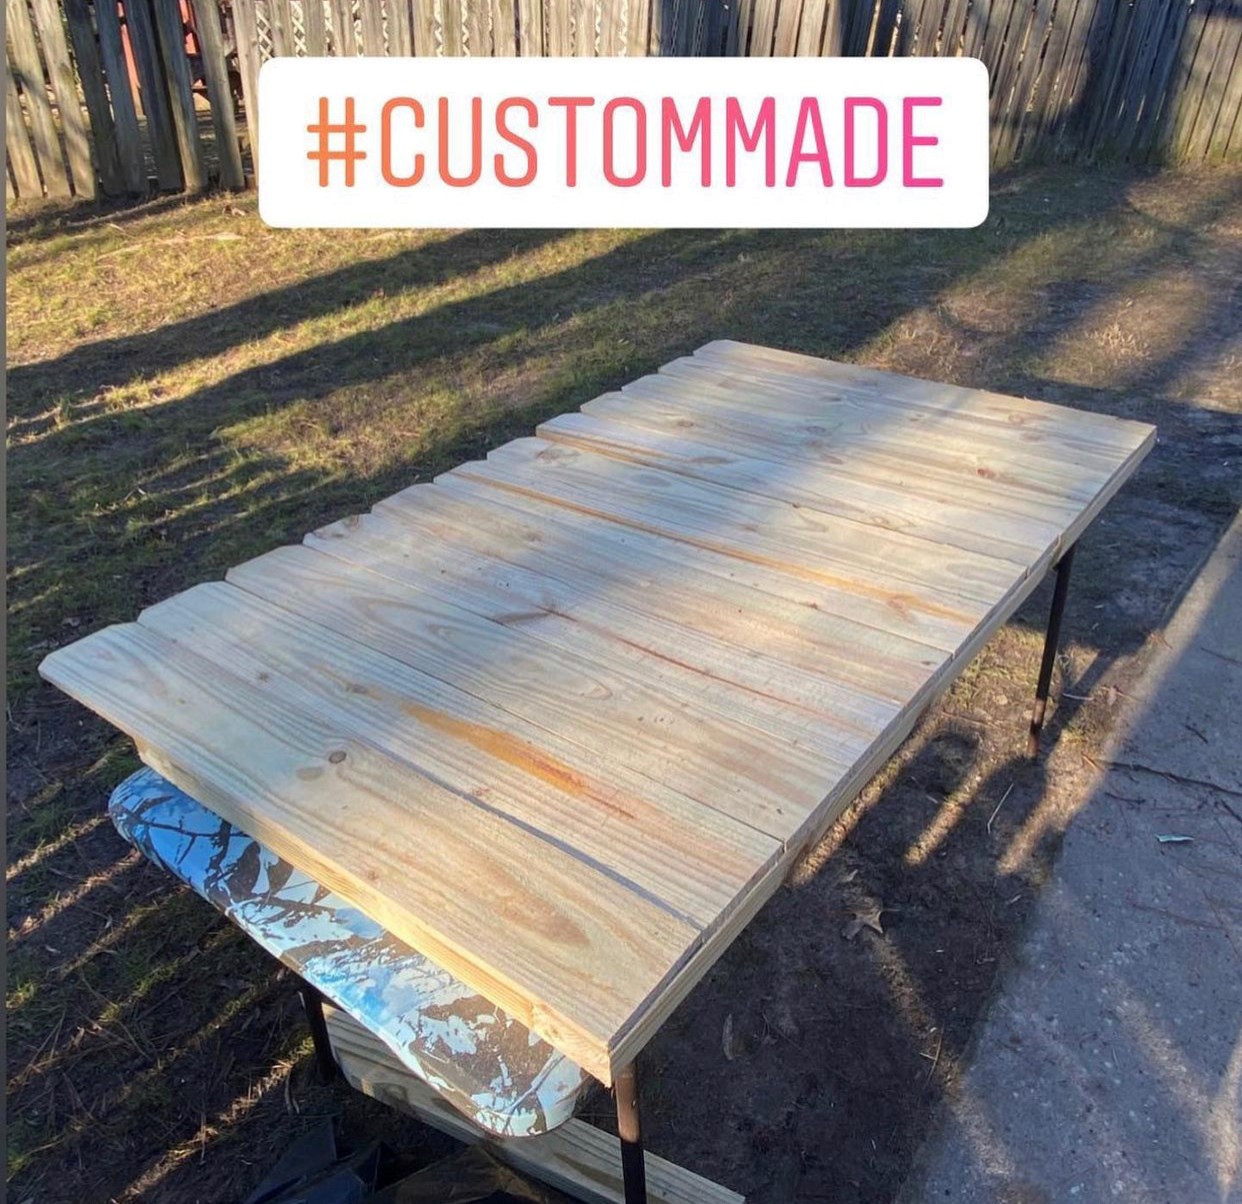 Custom made fence from Helpful Hands and Repairs, Inc.